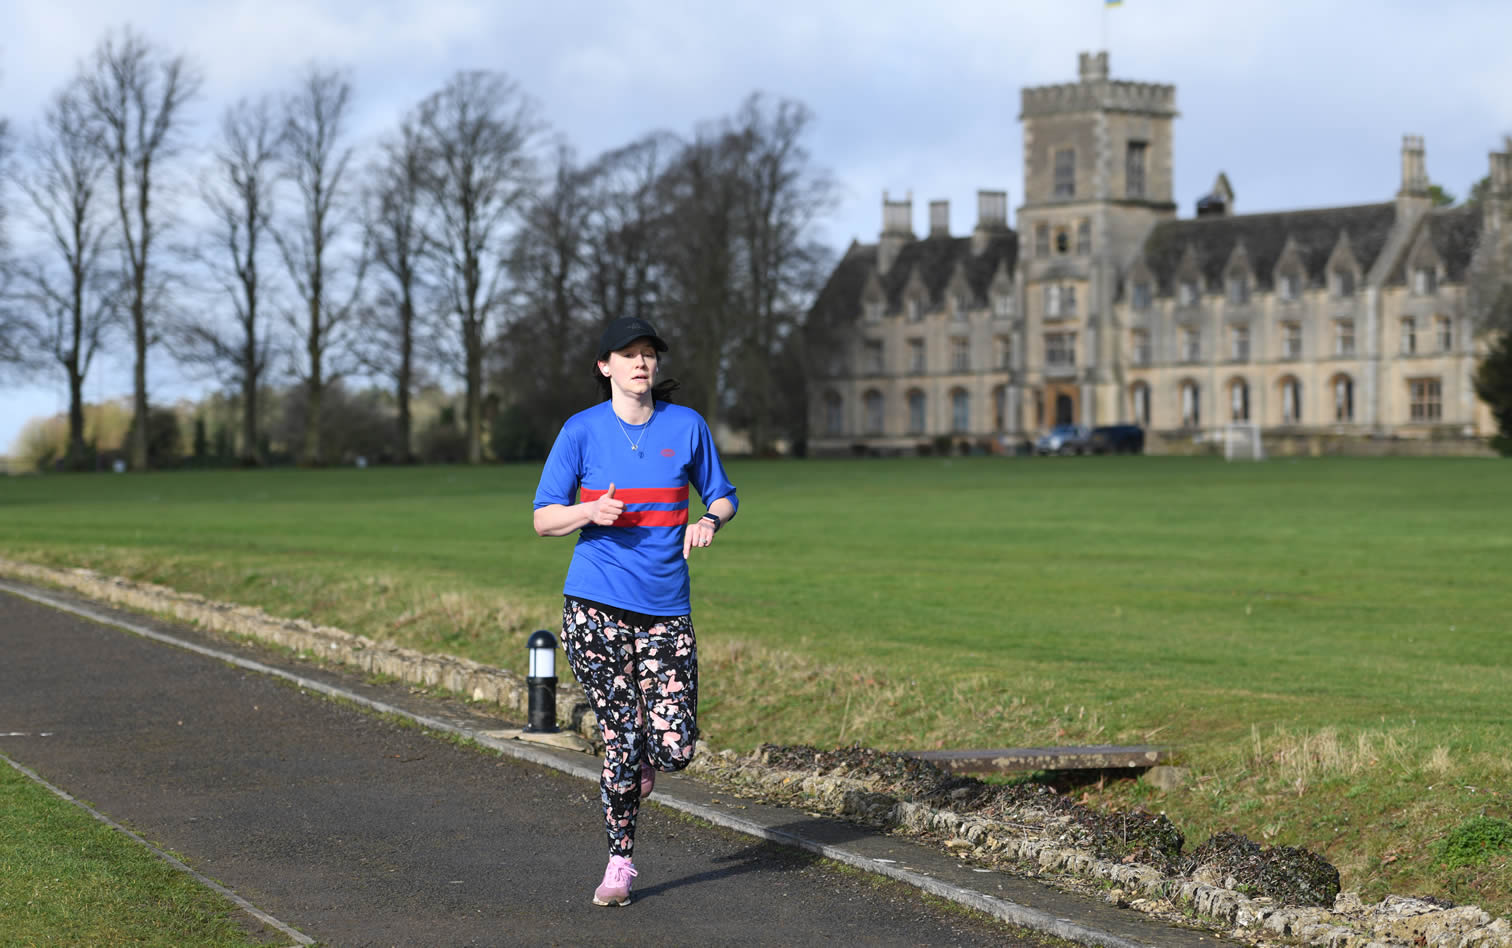 Libby Taylor at Cirencester parkrun - 12th March 2022